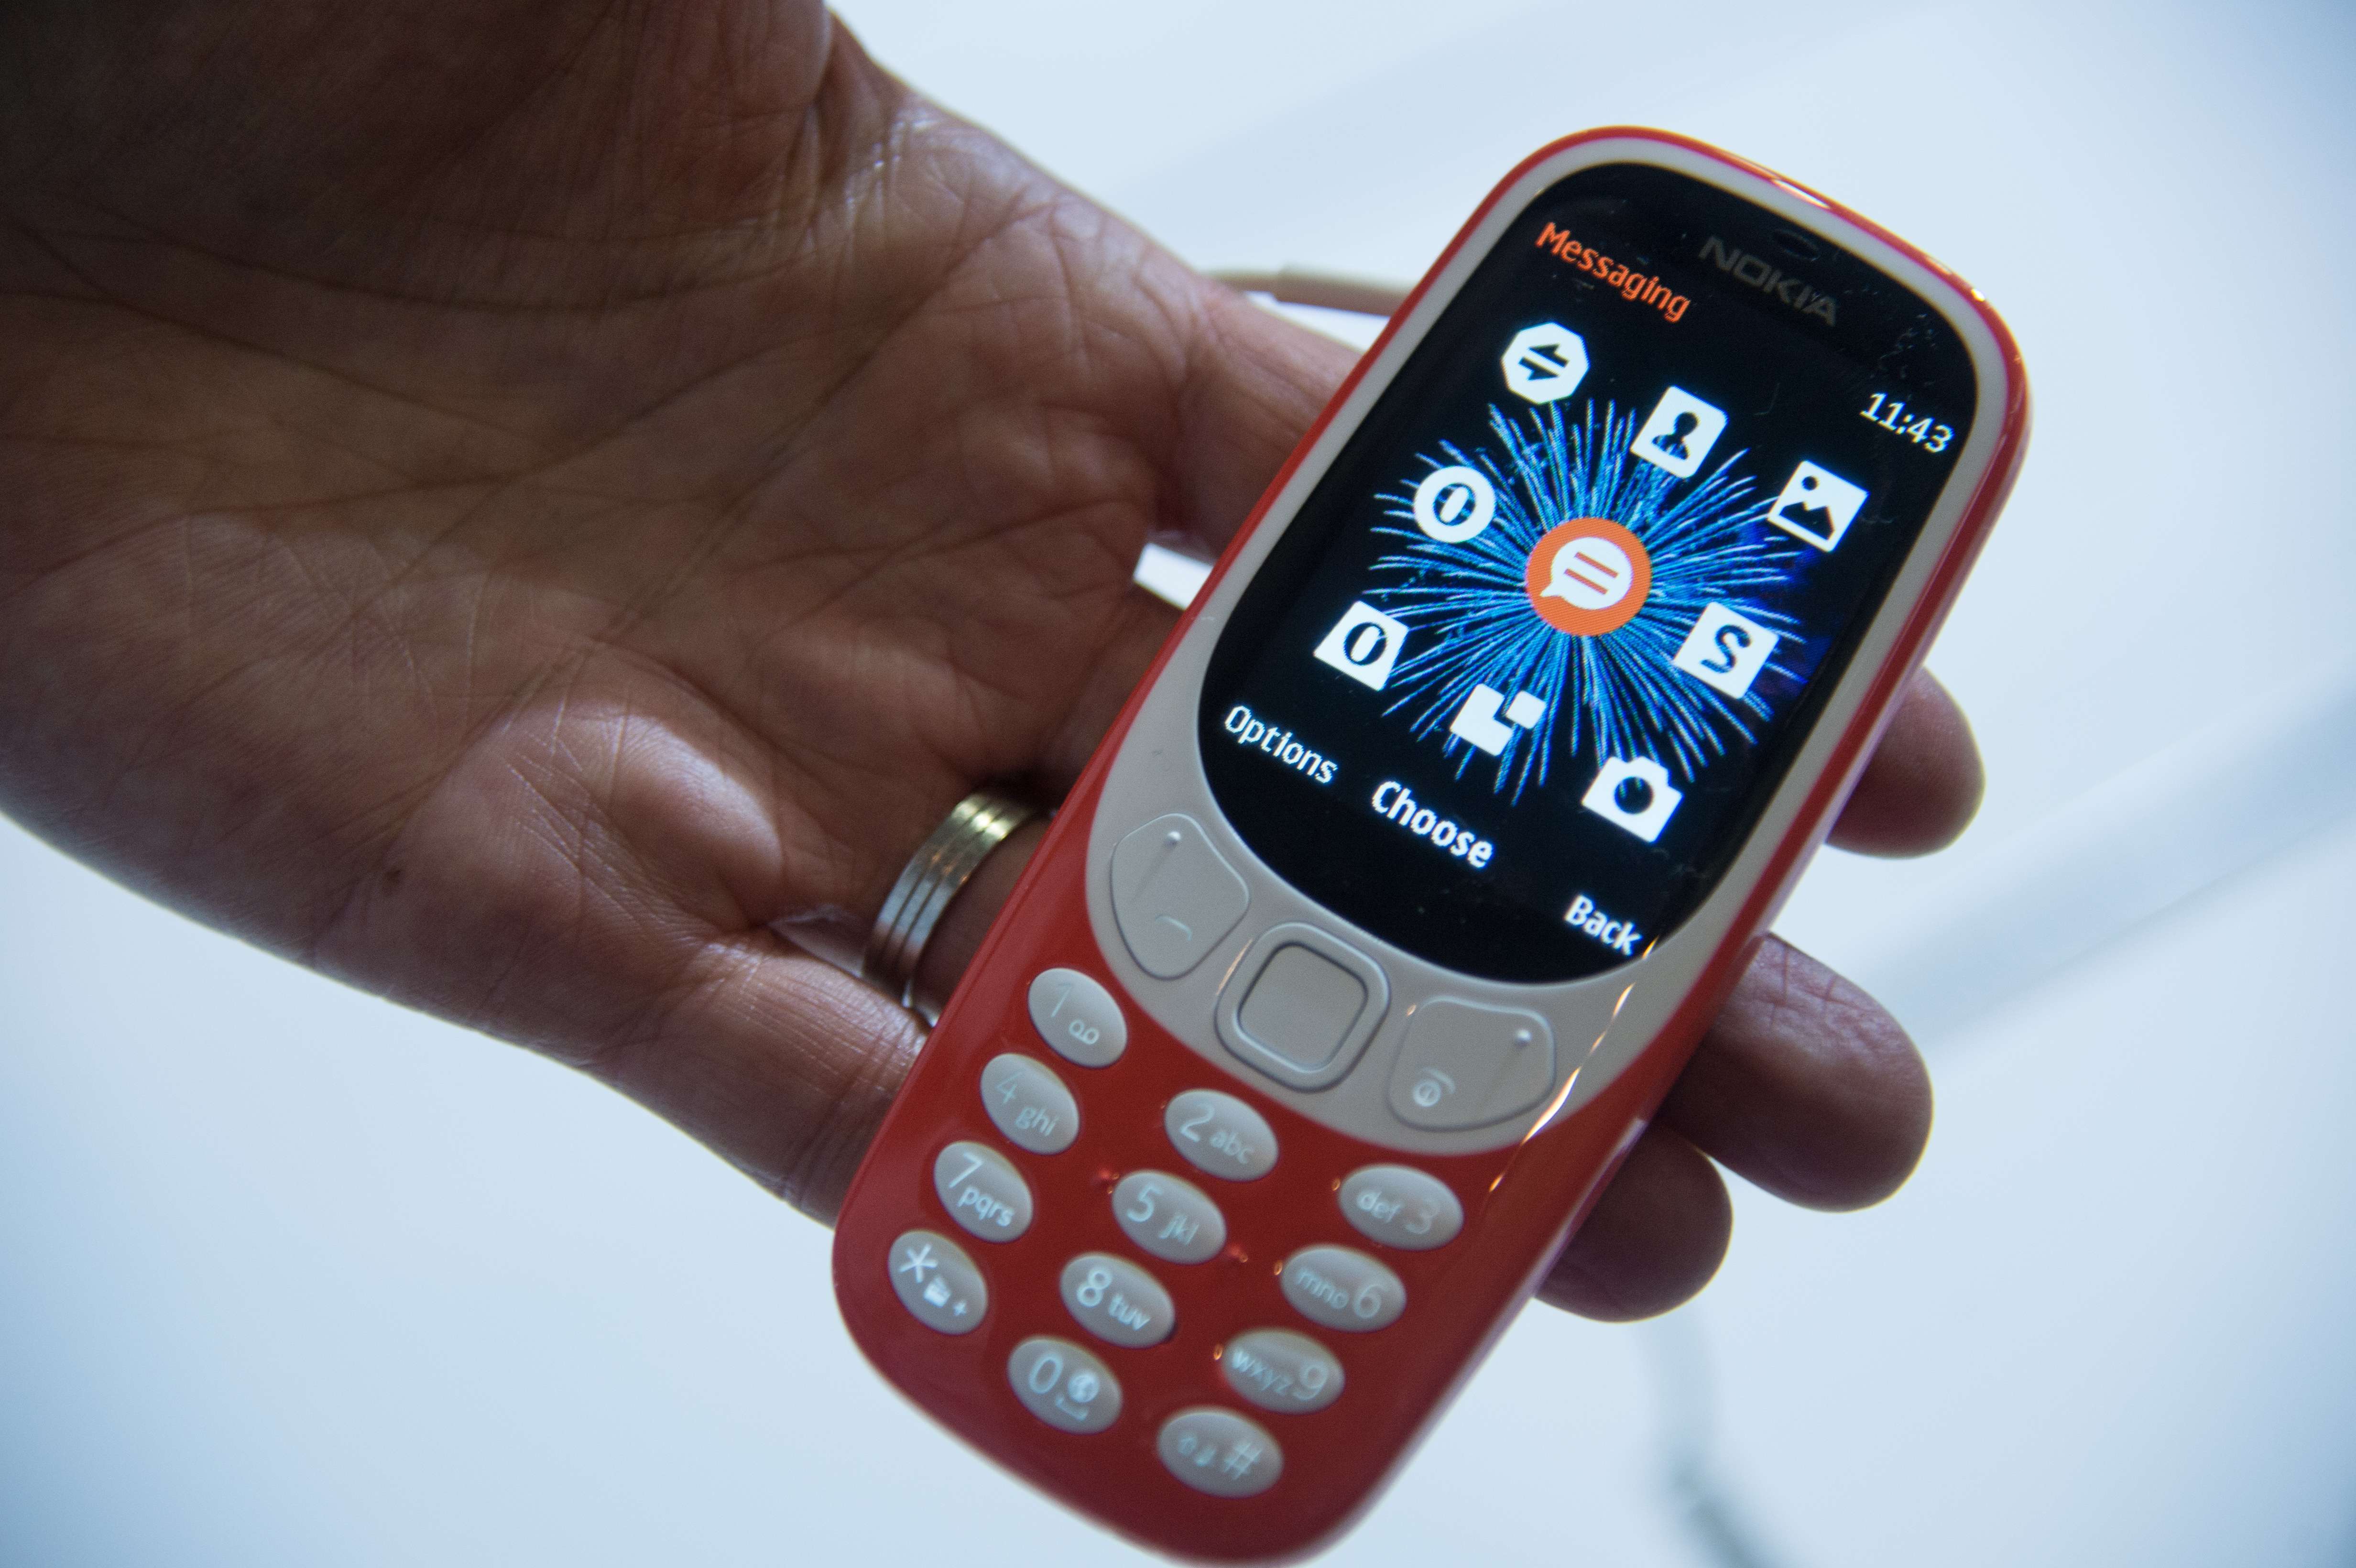 The new-look Nokia 3310. Photo: AFP